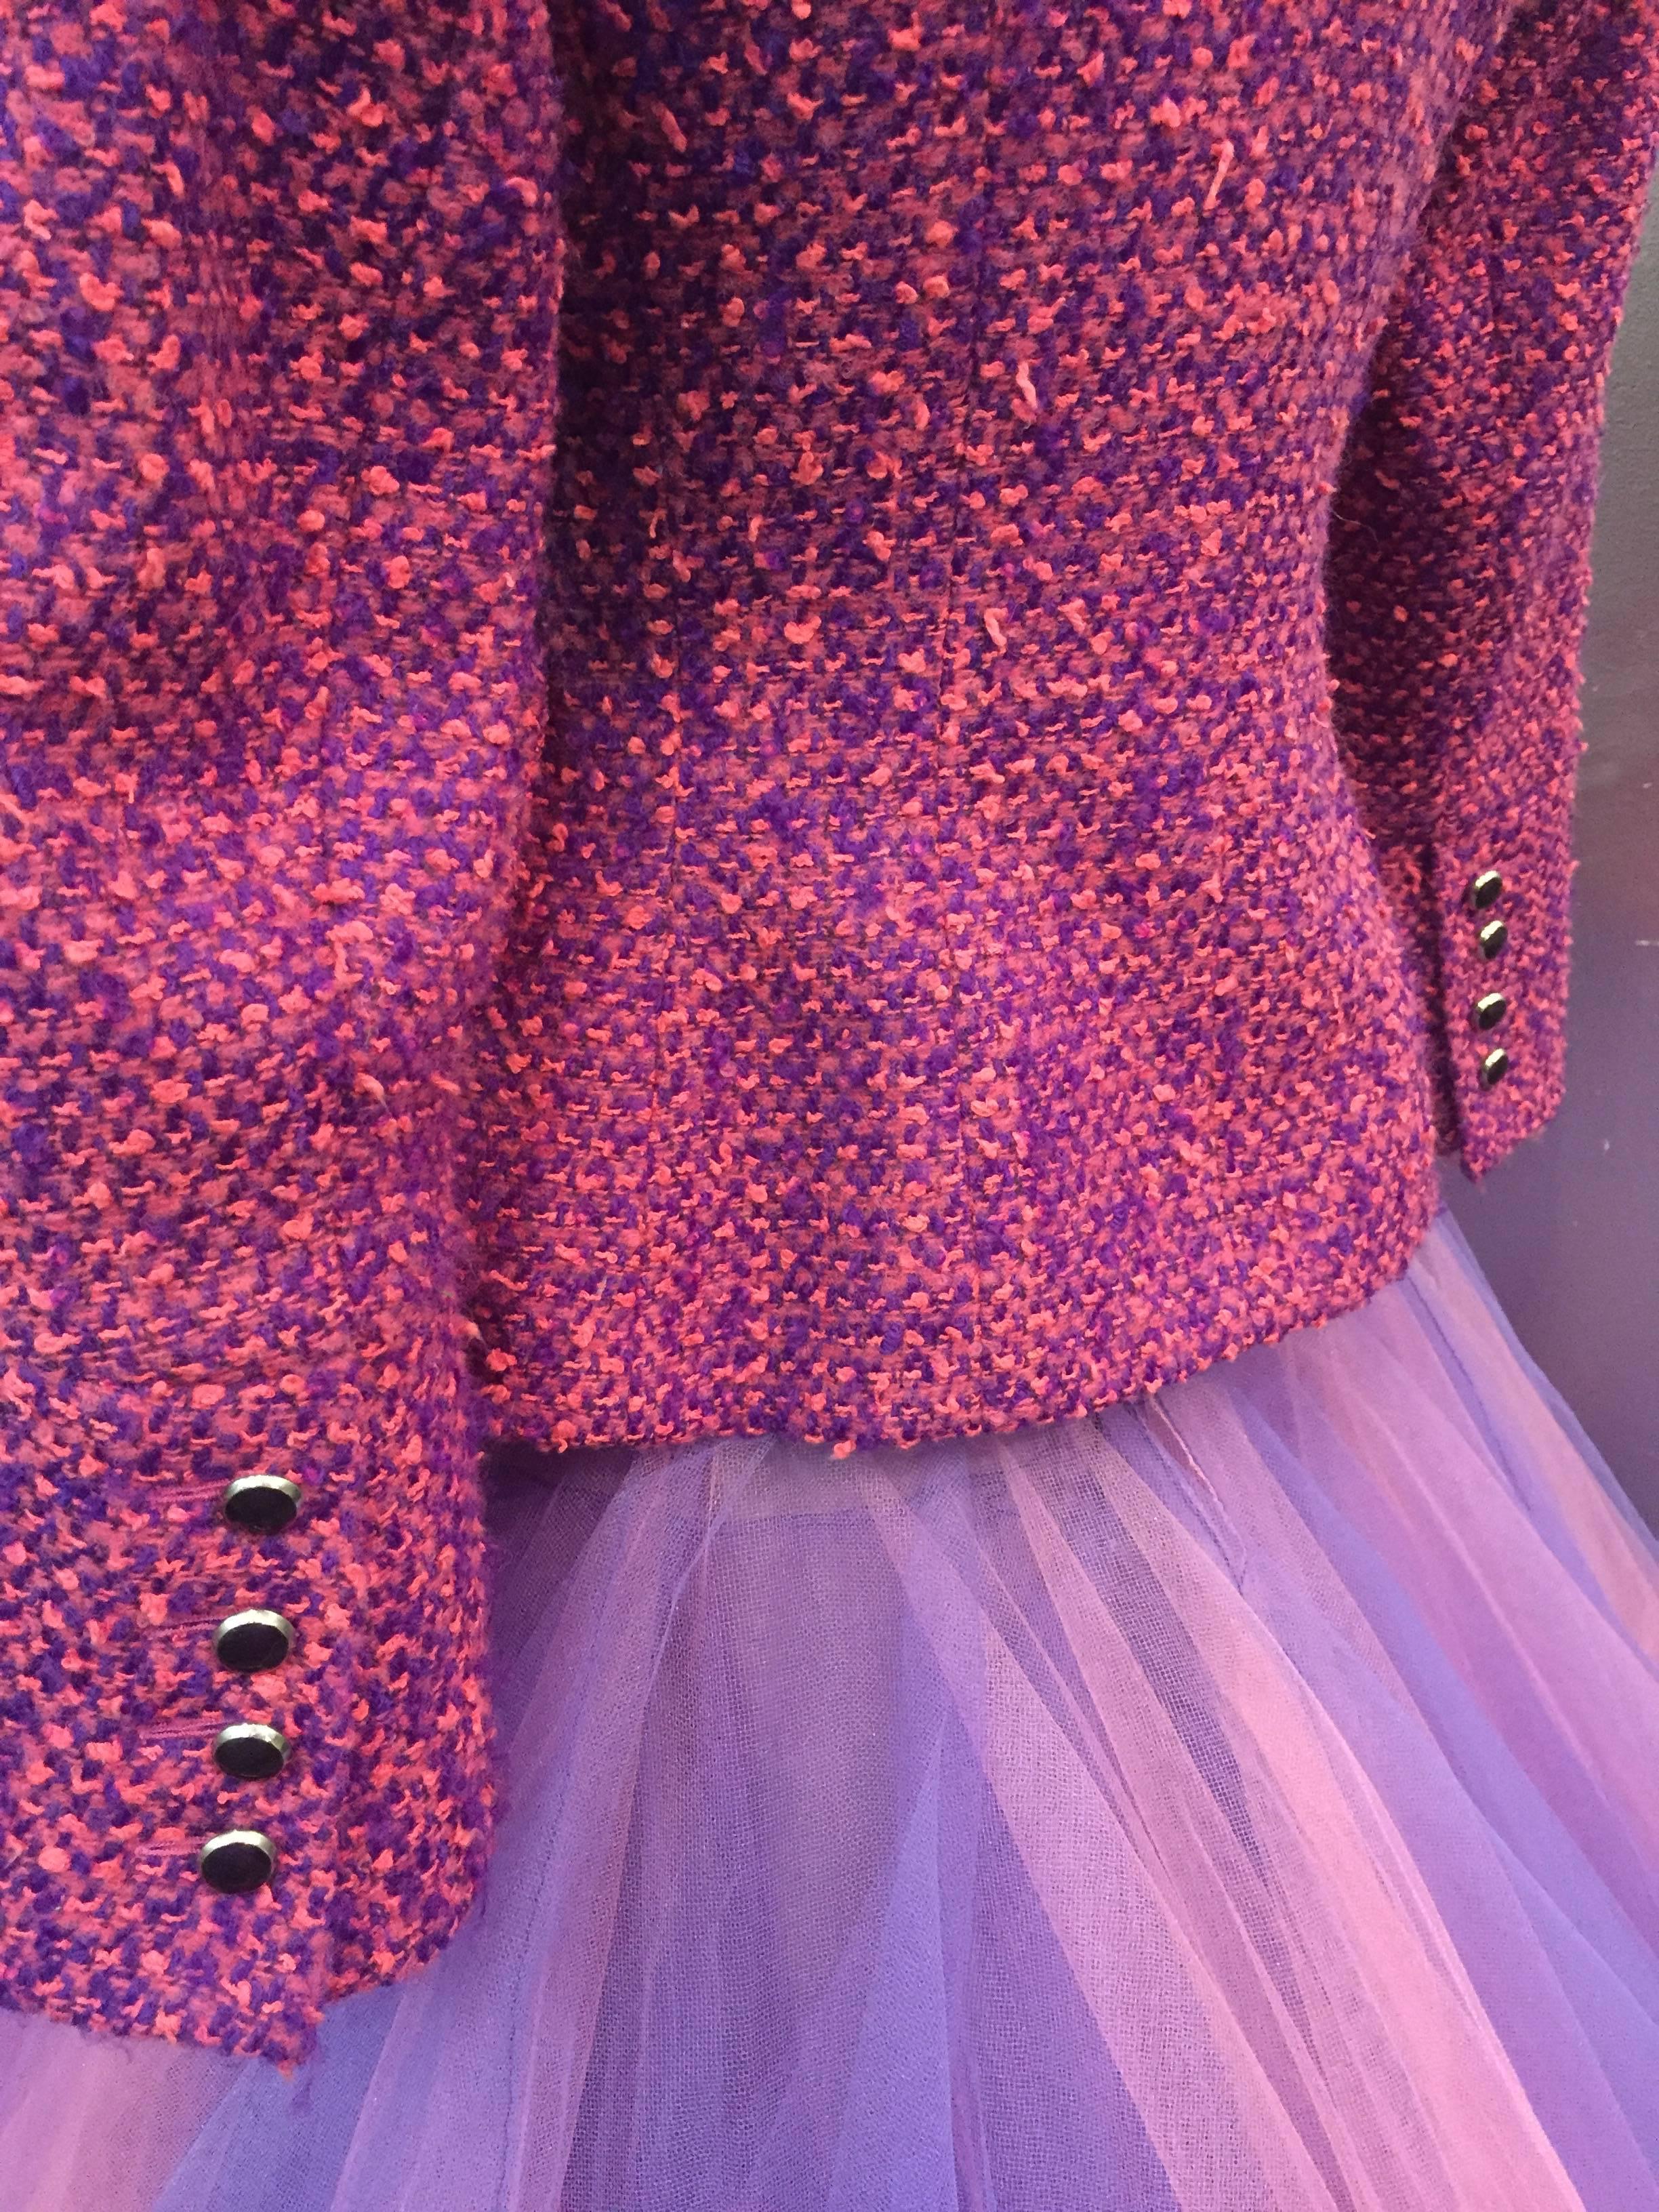 1990 JACQUES FATH Wool Tweed Jacket and Tulle Ball Skirt in Pink and Purple  1